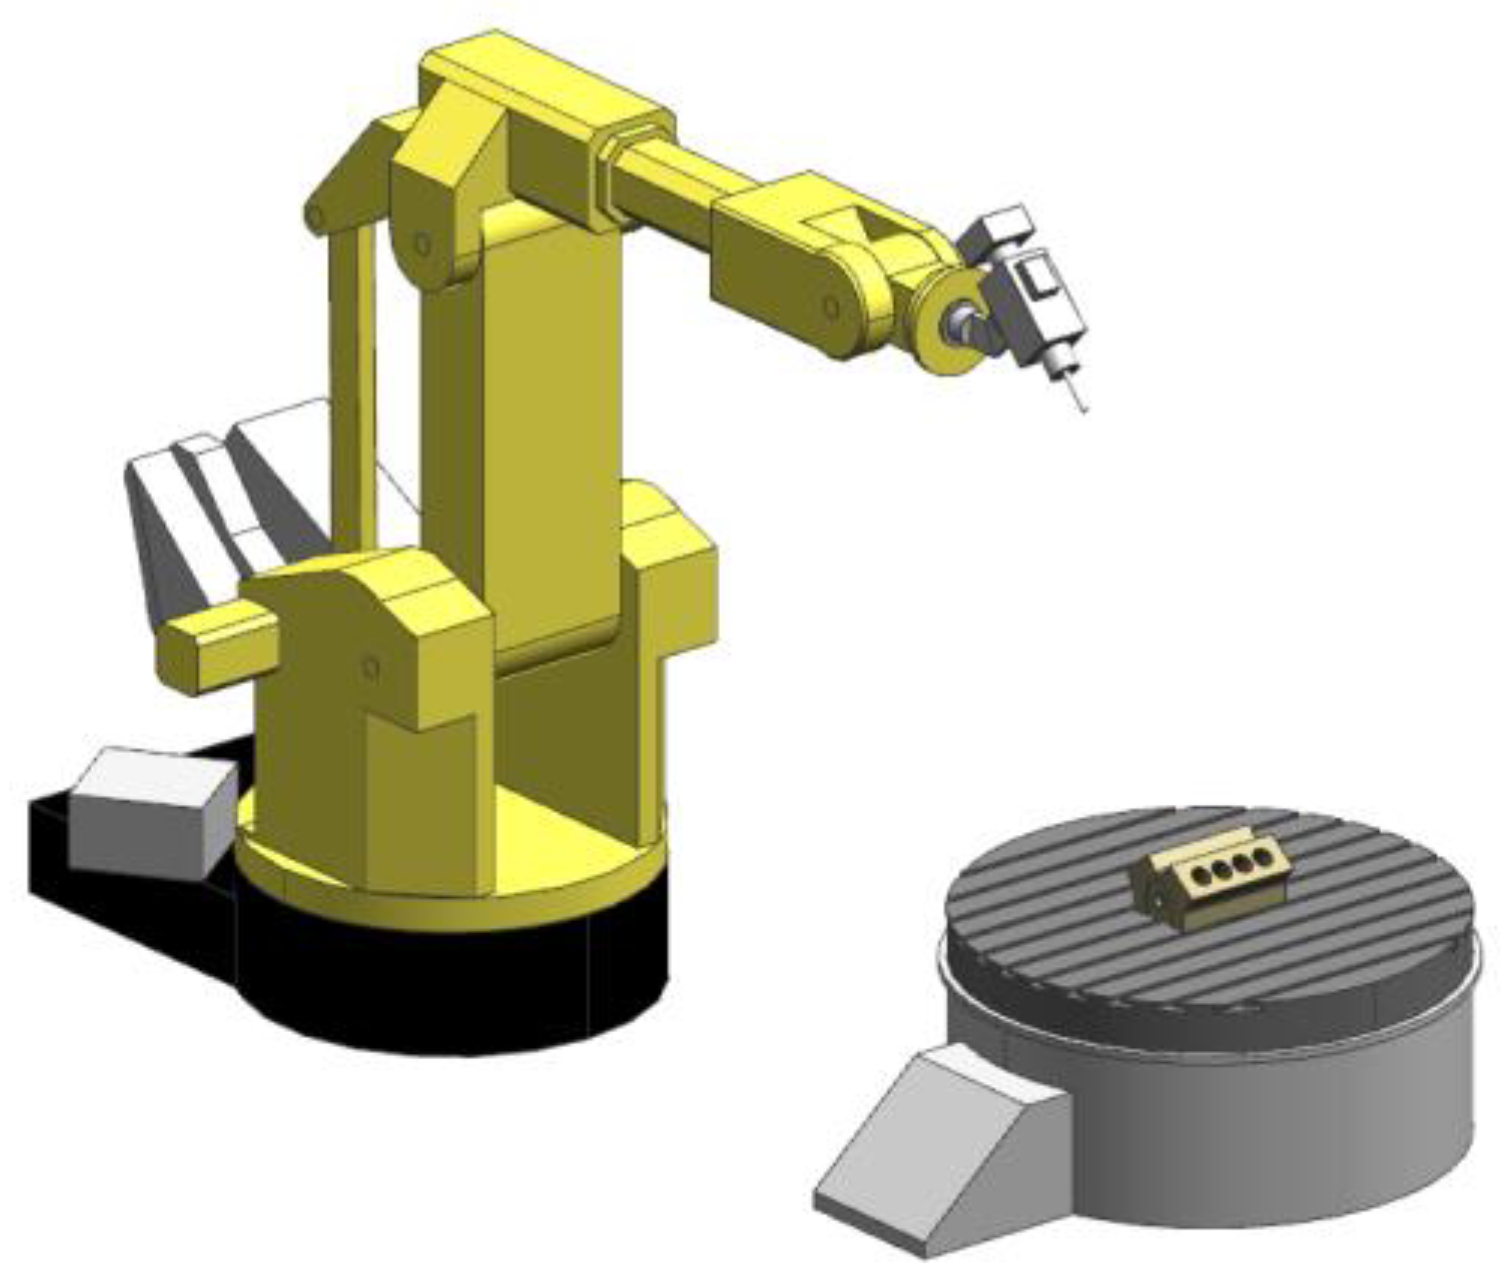 Applied Sciences | Free Full-Text | Stiffness-Based Cell Setup Optimization  for Robotic Deburring with a Rotary Table